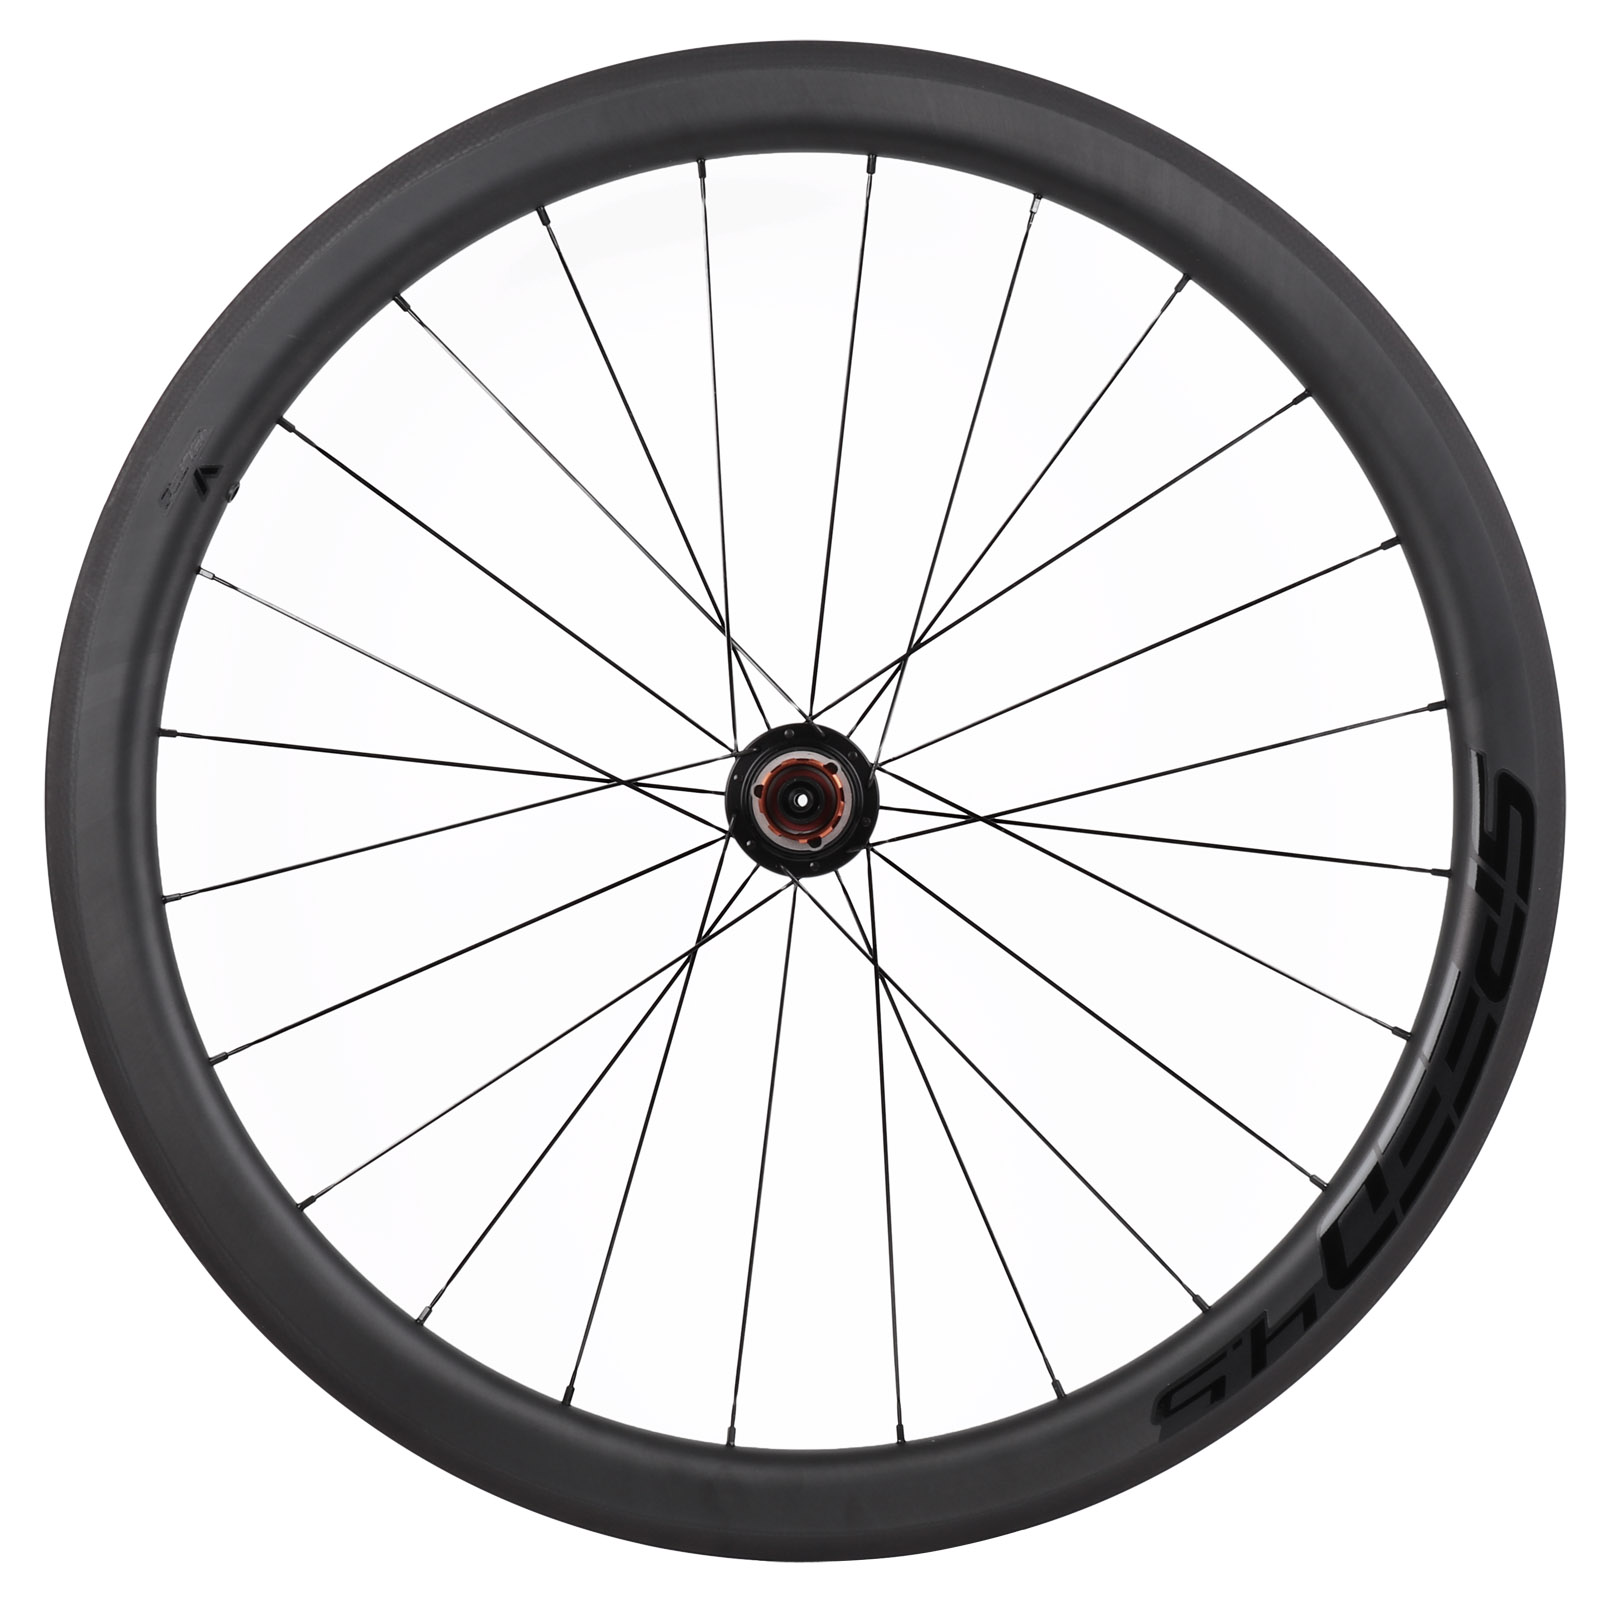 Picture of Veltec Speed 4.5 Carbon Rear Wheel - Clincher - QR130 - black with black decals